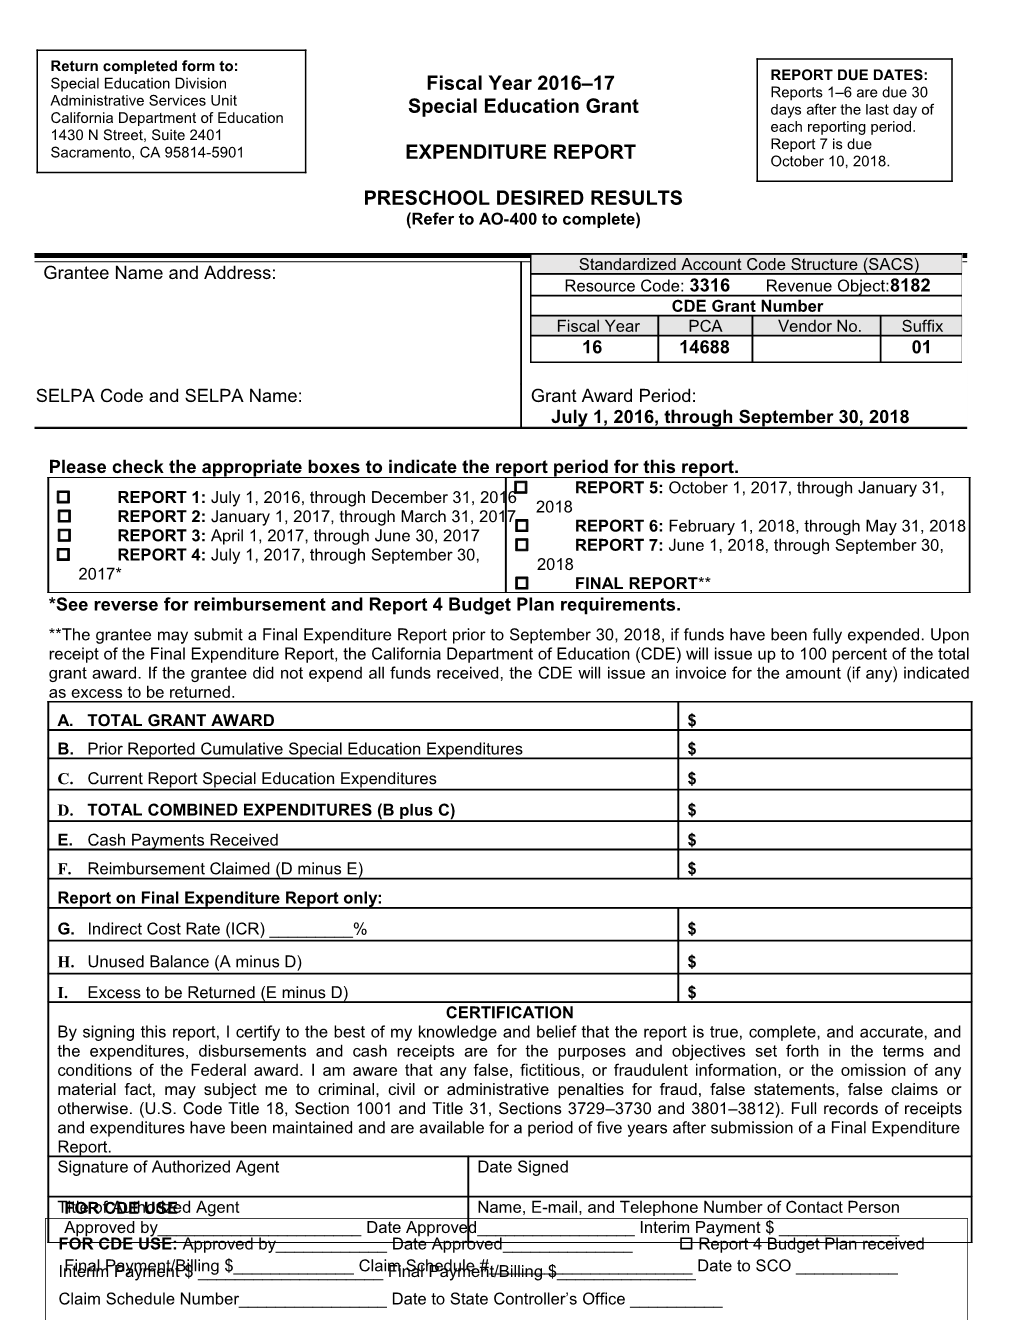 Form-16: Expenditure Report for PCA 14688 - Administration & Support (CA Dept of Education)